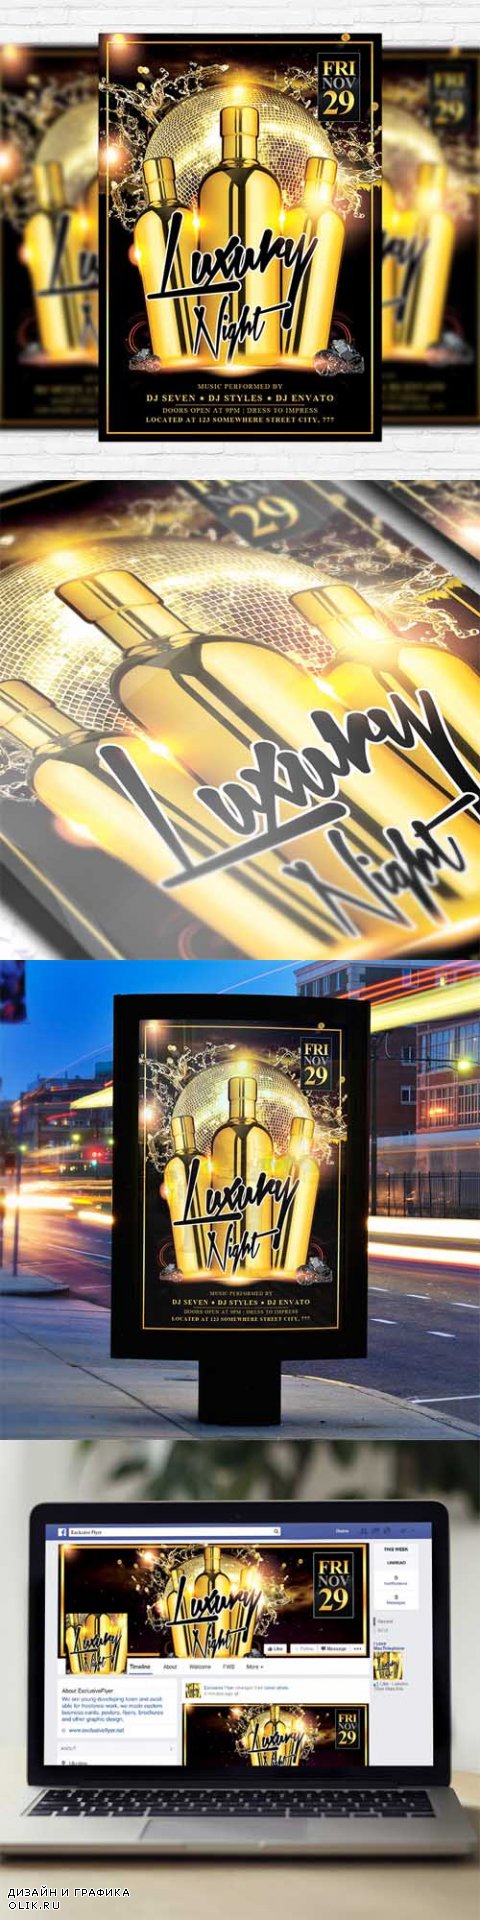 Flyer Template - Luxury Night + Facebook Cover